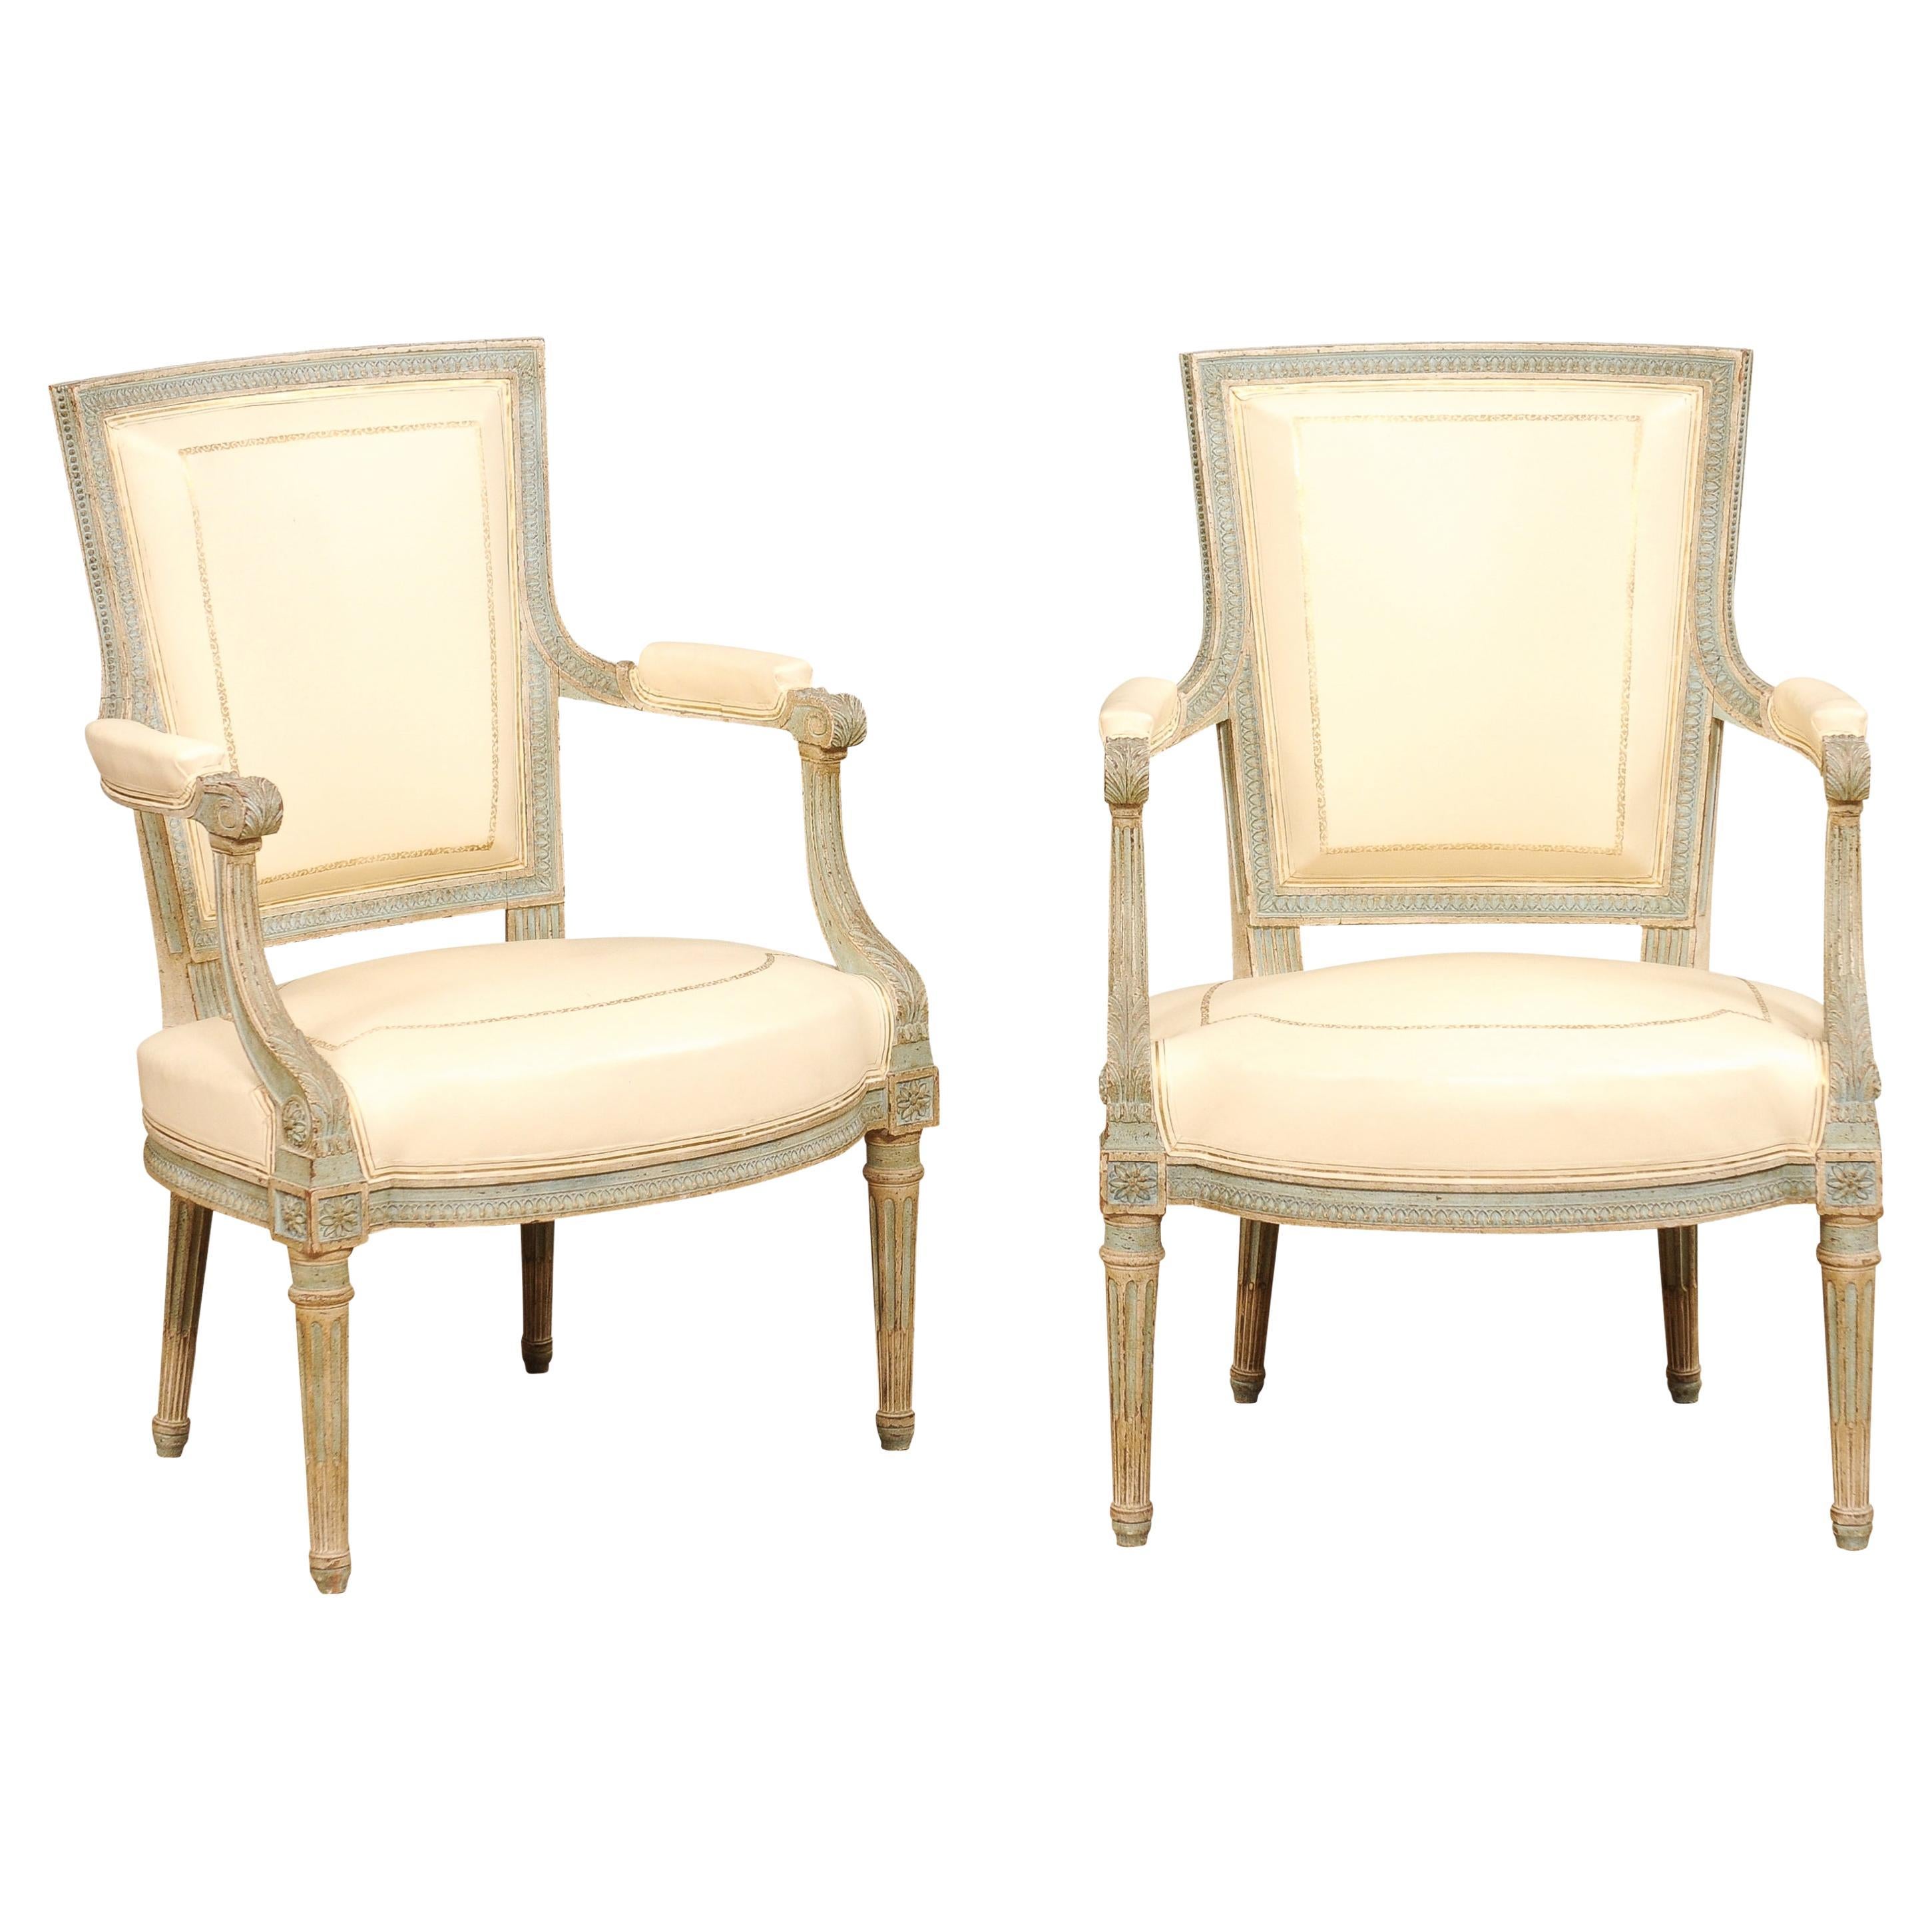 Pair of Louis XVI Style Blue Grey Painted Armchairs Covered in White Leather